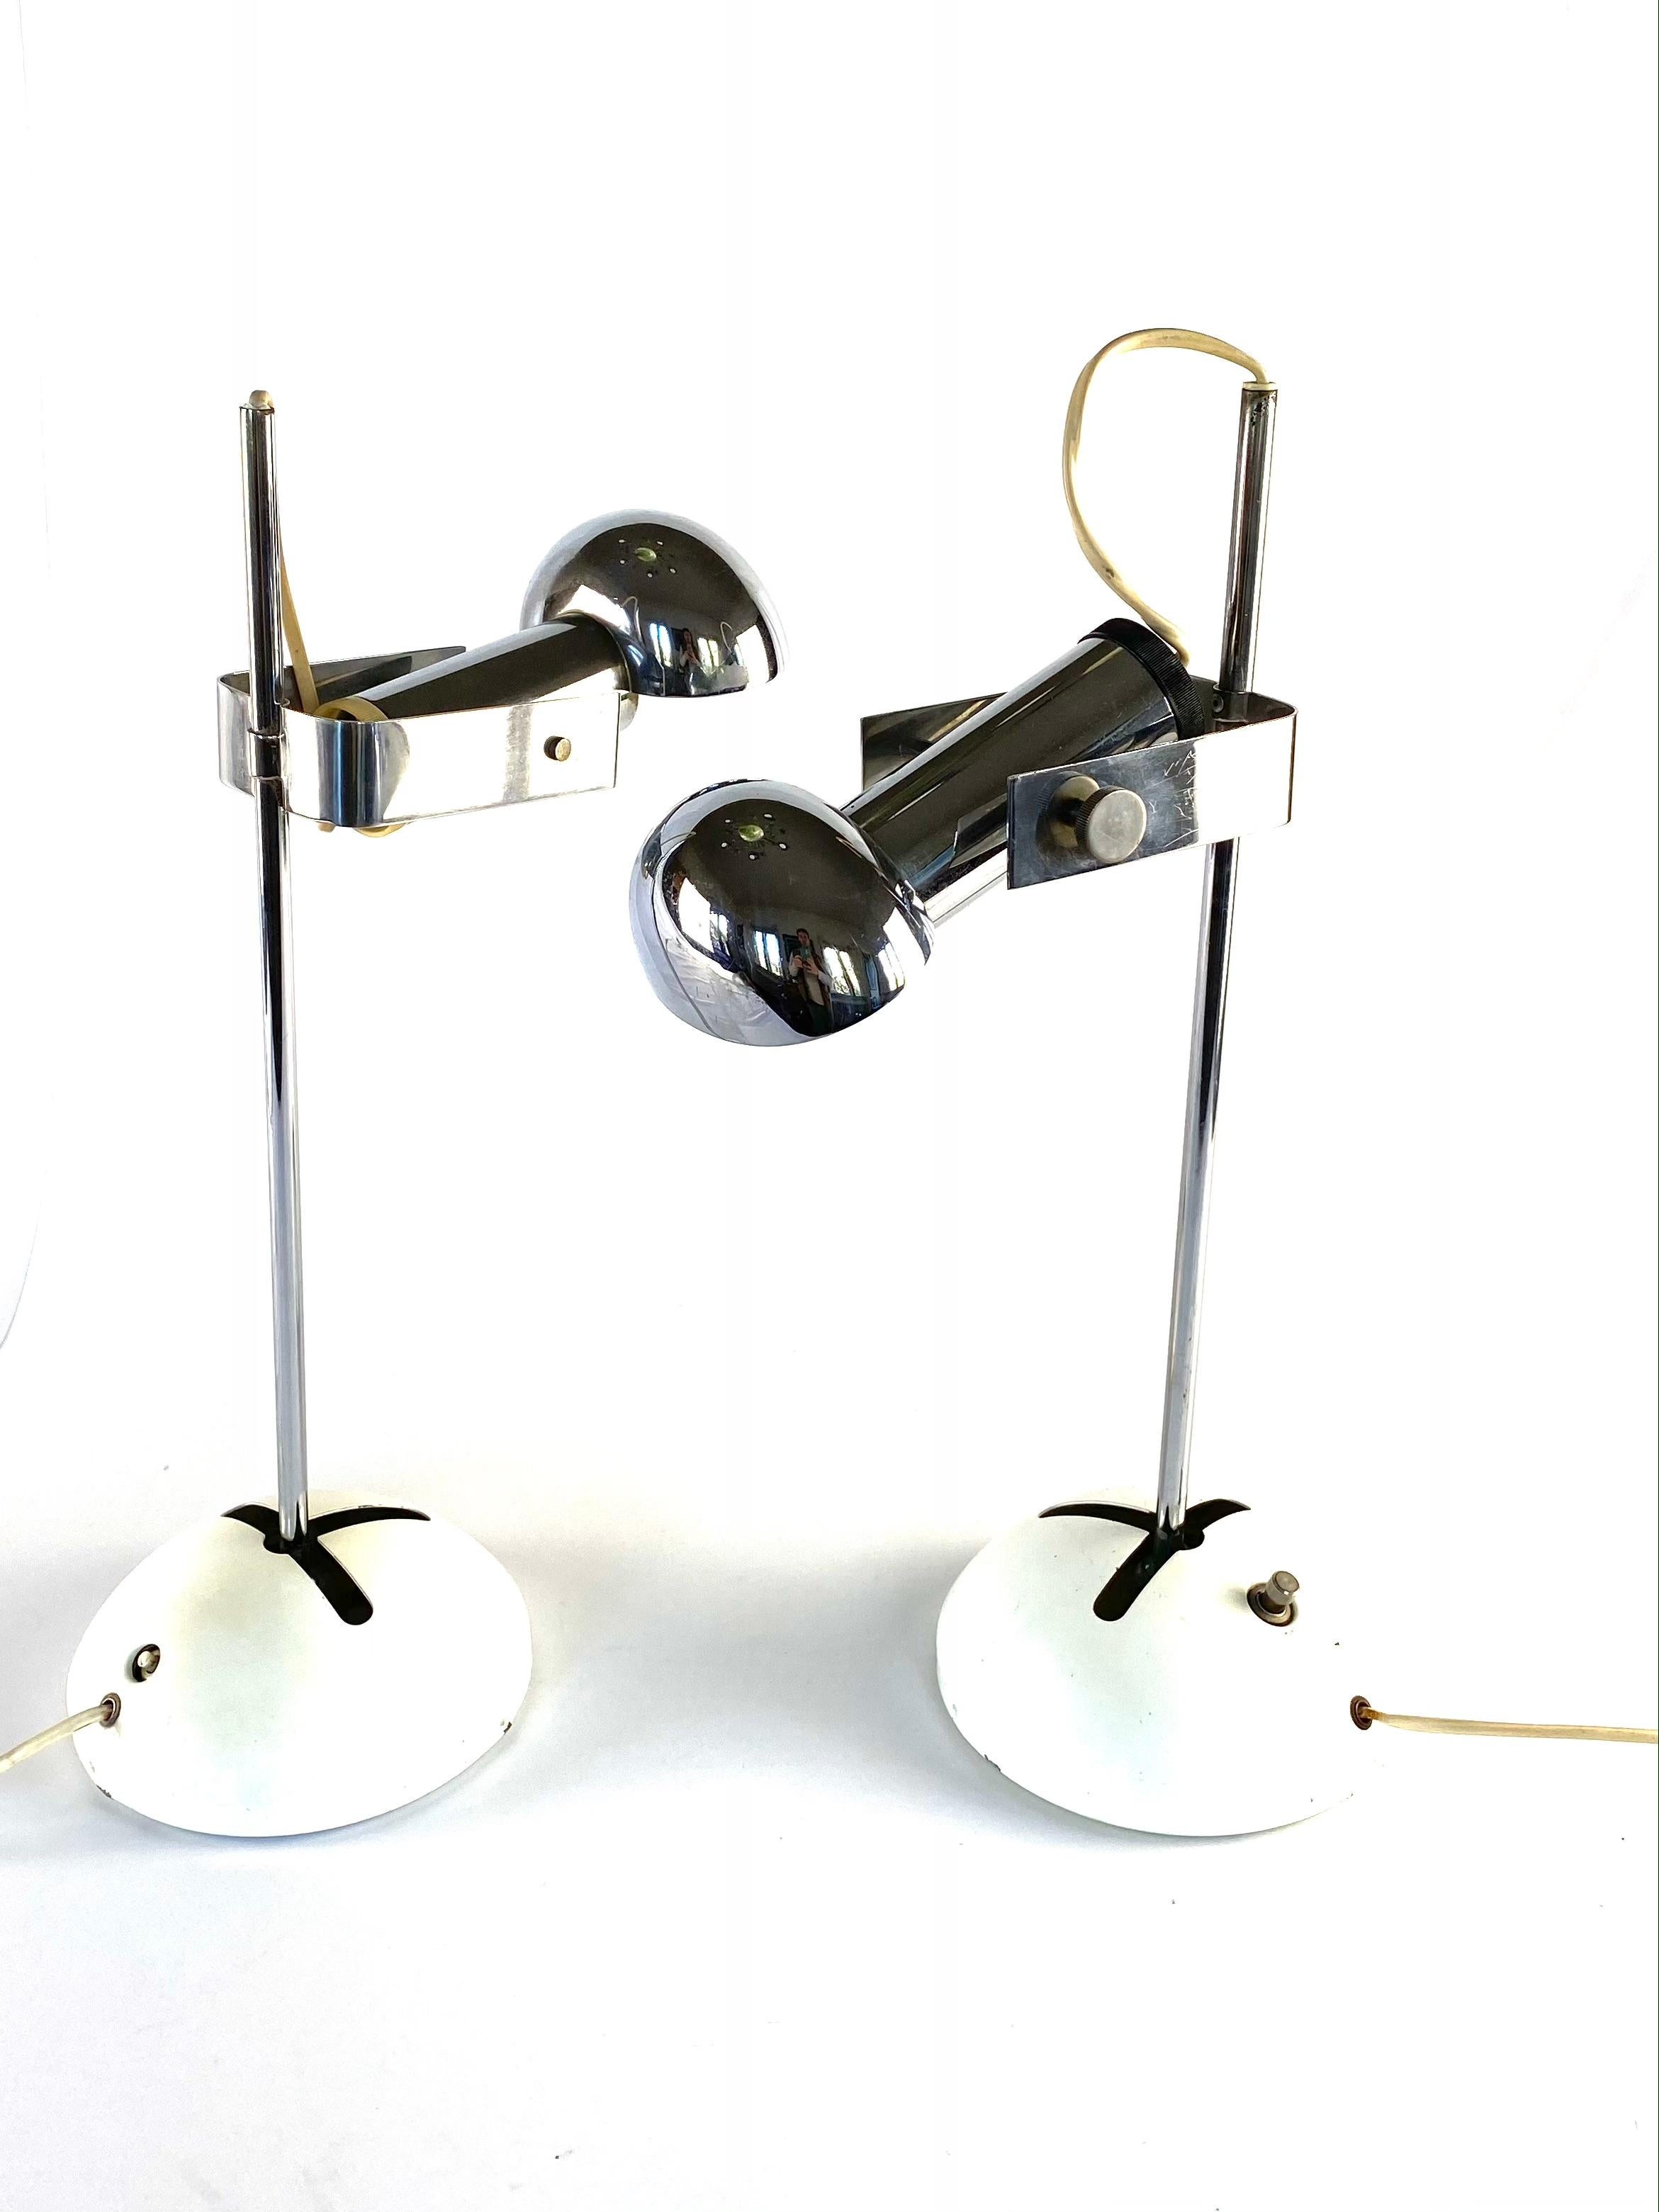 Set of 2 Robert Sonneman desk lamp model T359 manufactured by Luci Cinisello Milano, 1972. 

The base of this lamp is adjustable and based on the gear lever of a car. The shade is adjustable as well. 

Metal partly chromed and partly white.